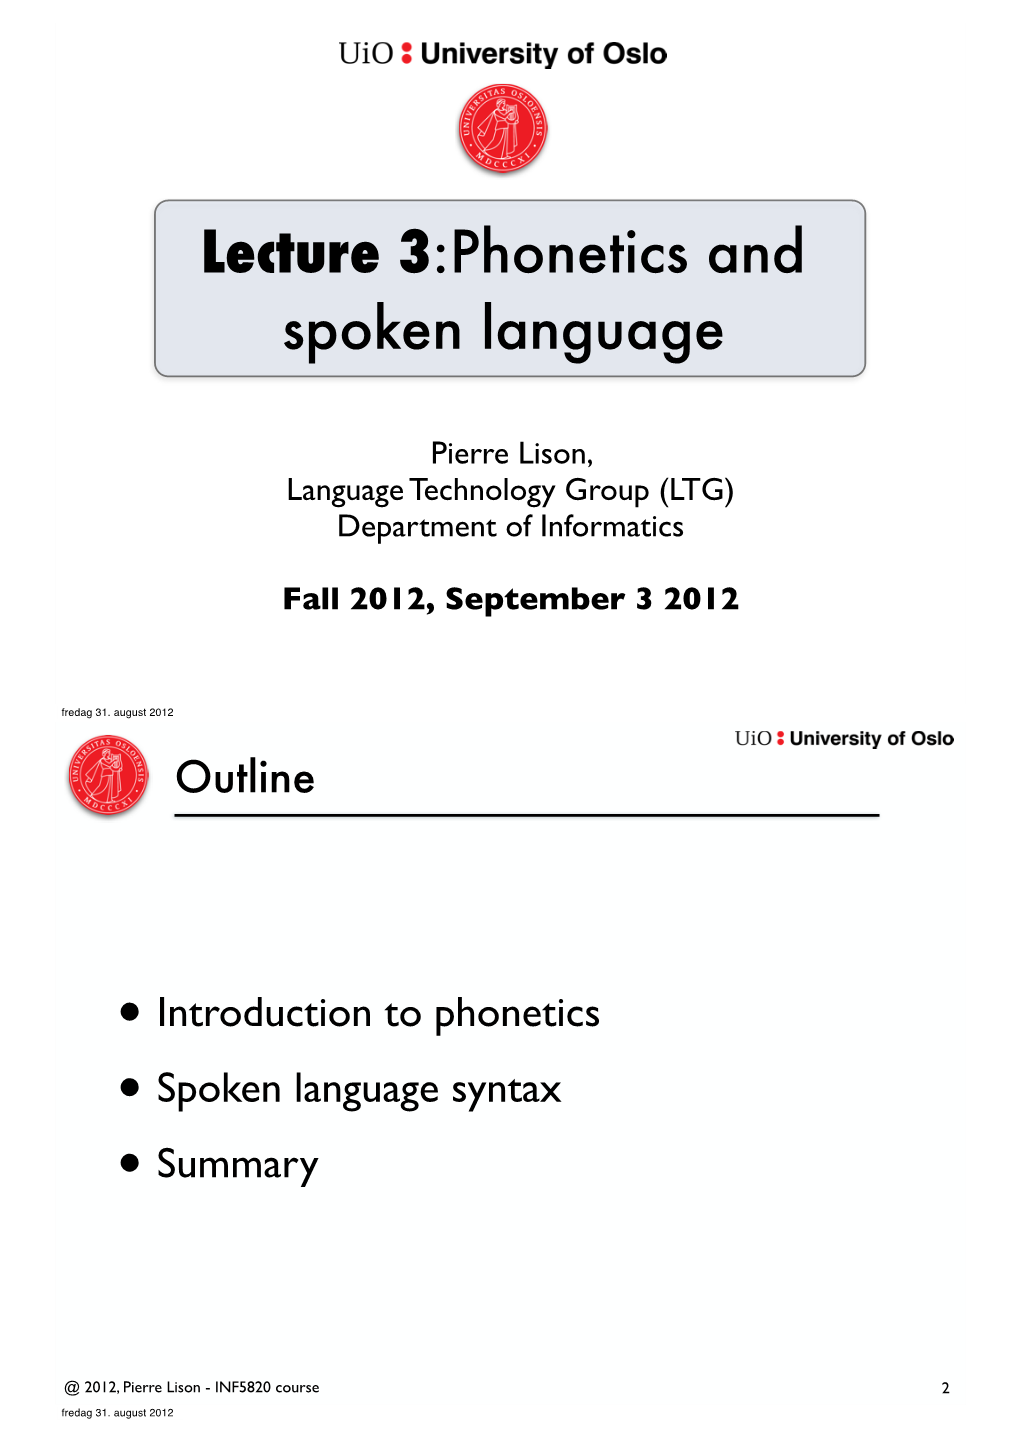 Lecture 3:Phonetics and Spoken Language